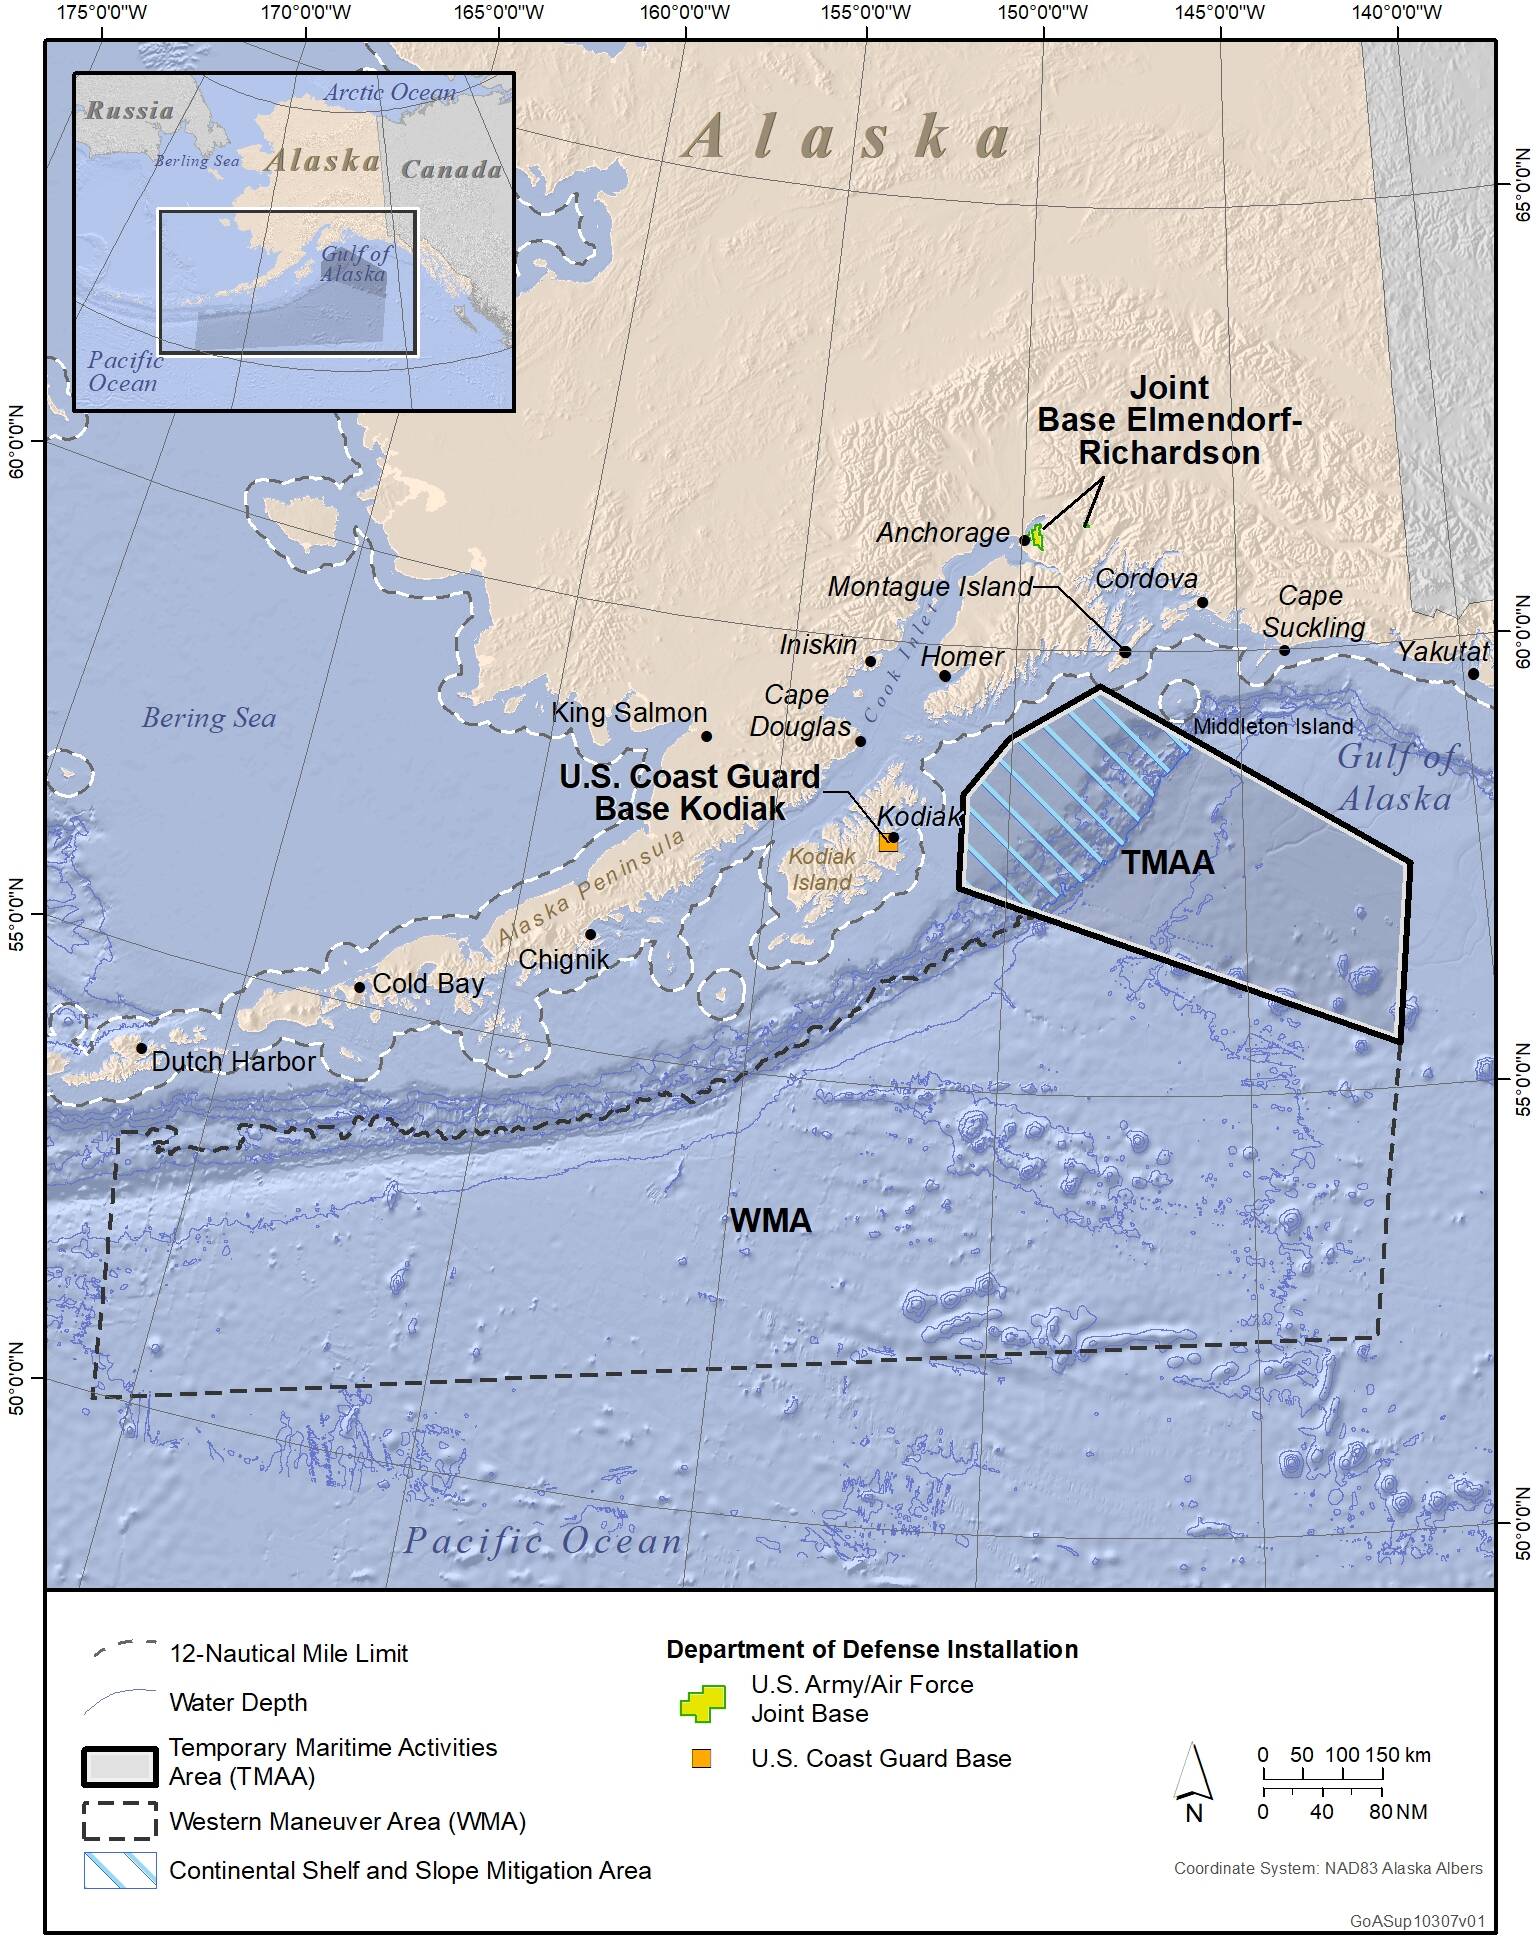 Courtesy art / U.S. Navy
The Navy is proposing to considerably expand the maneuver space for warship and aircraft operations in the Gulf of Alaska while at the same time limiting the use of explosive munitions in the coastal waters in a proposal coming up for public comment in the spring of 2022.